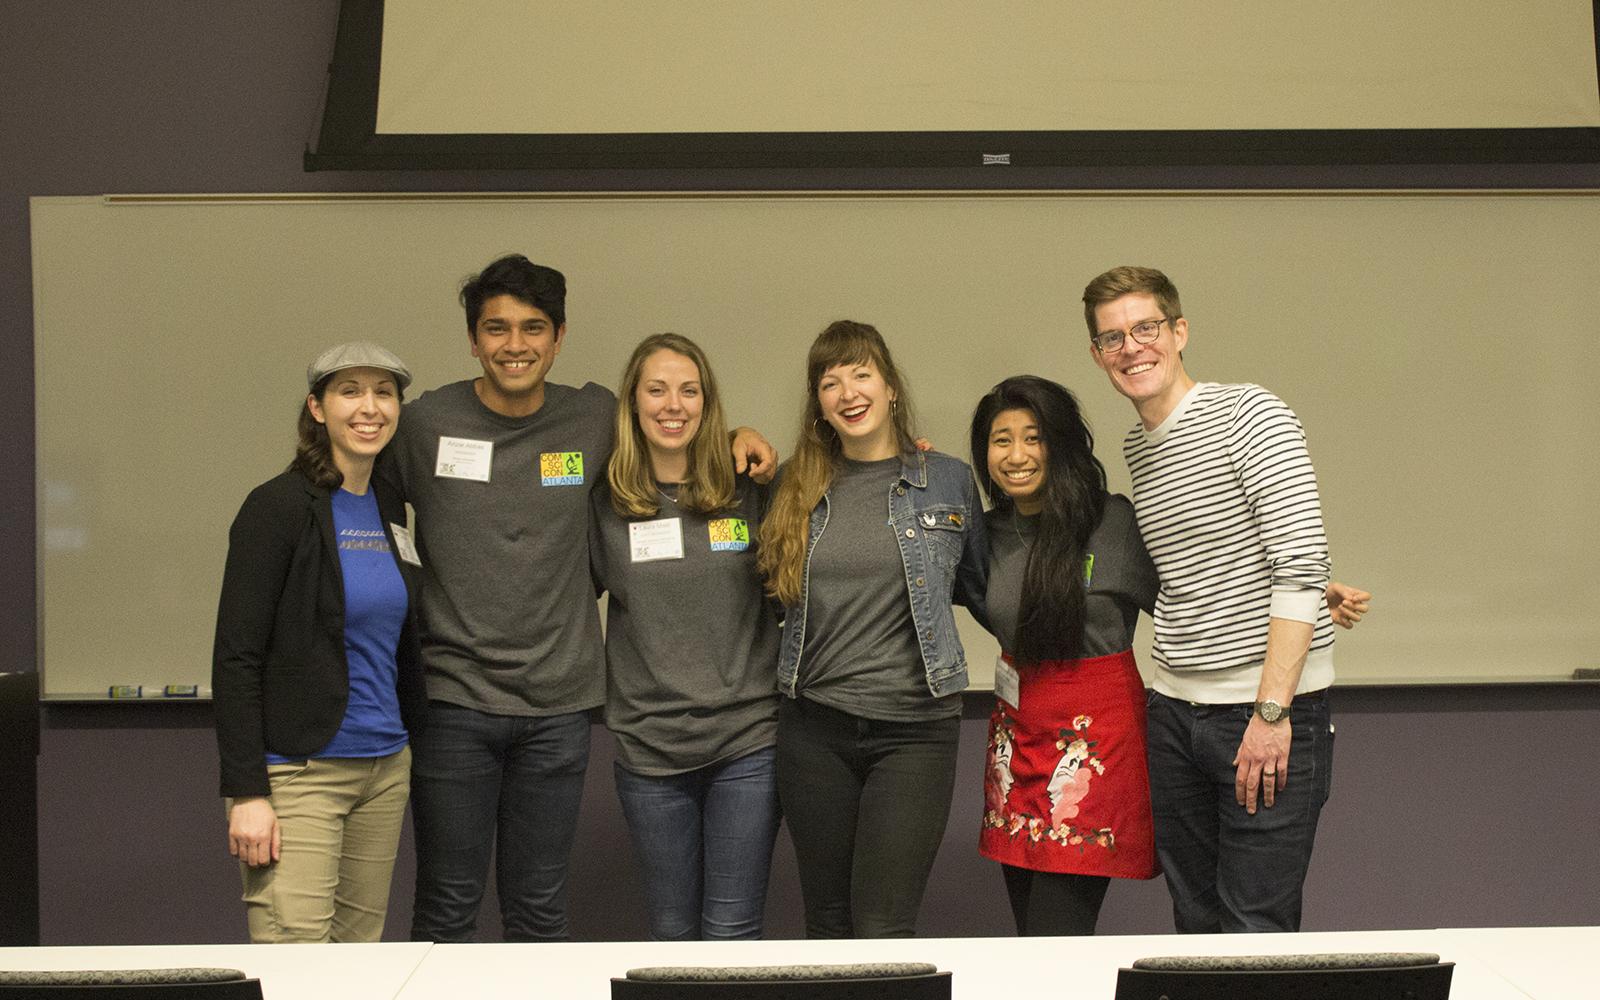 The ComSciCon ATL 2018 Team with FYFD creator Nicole Sharp and It's Okay to Be Smart Host/Writer/Creator Joe Hanson (Pictured from left to right: Dr. Nicole Sharp, Anzar Abbas, Laura Mast, Dr. Kelly Vinal, Carleenmae Sabusap, and Dr. Joe Hanson)

 